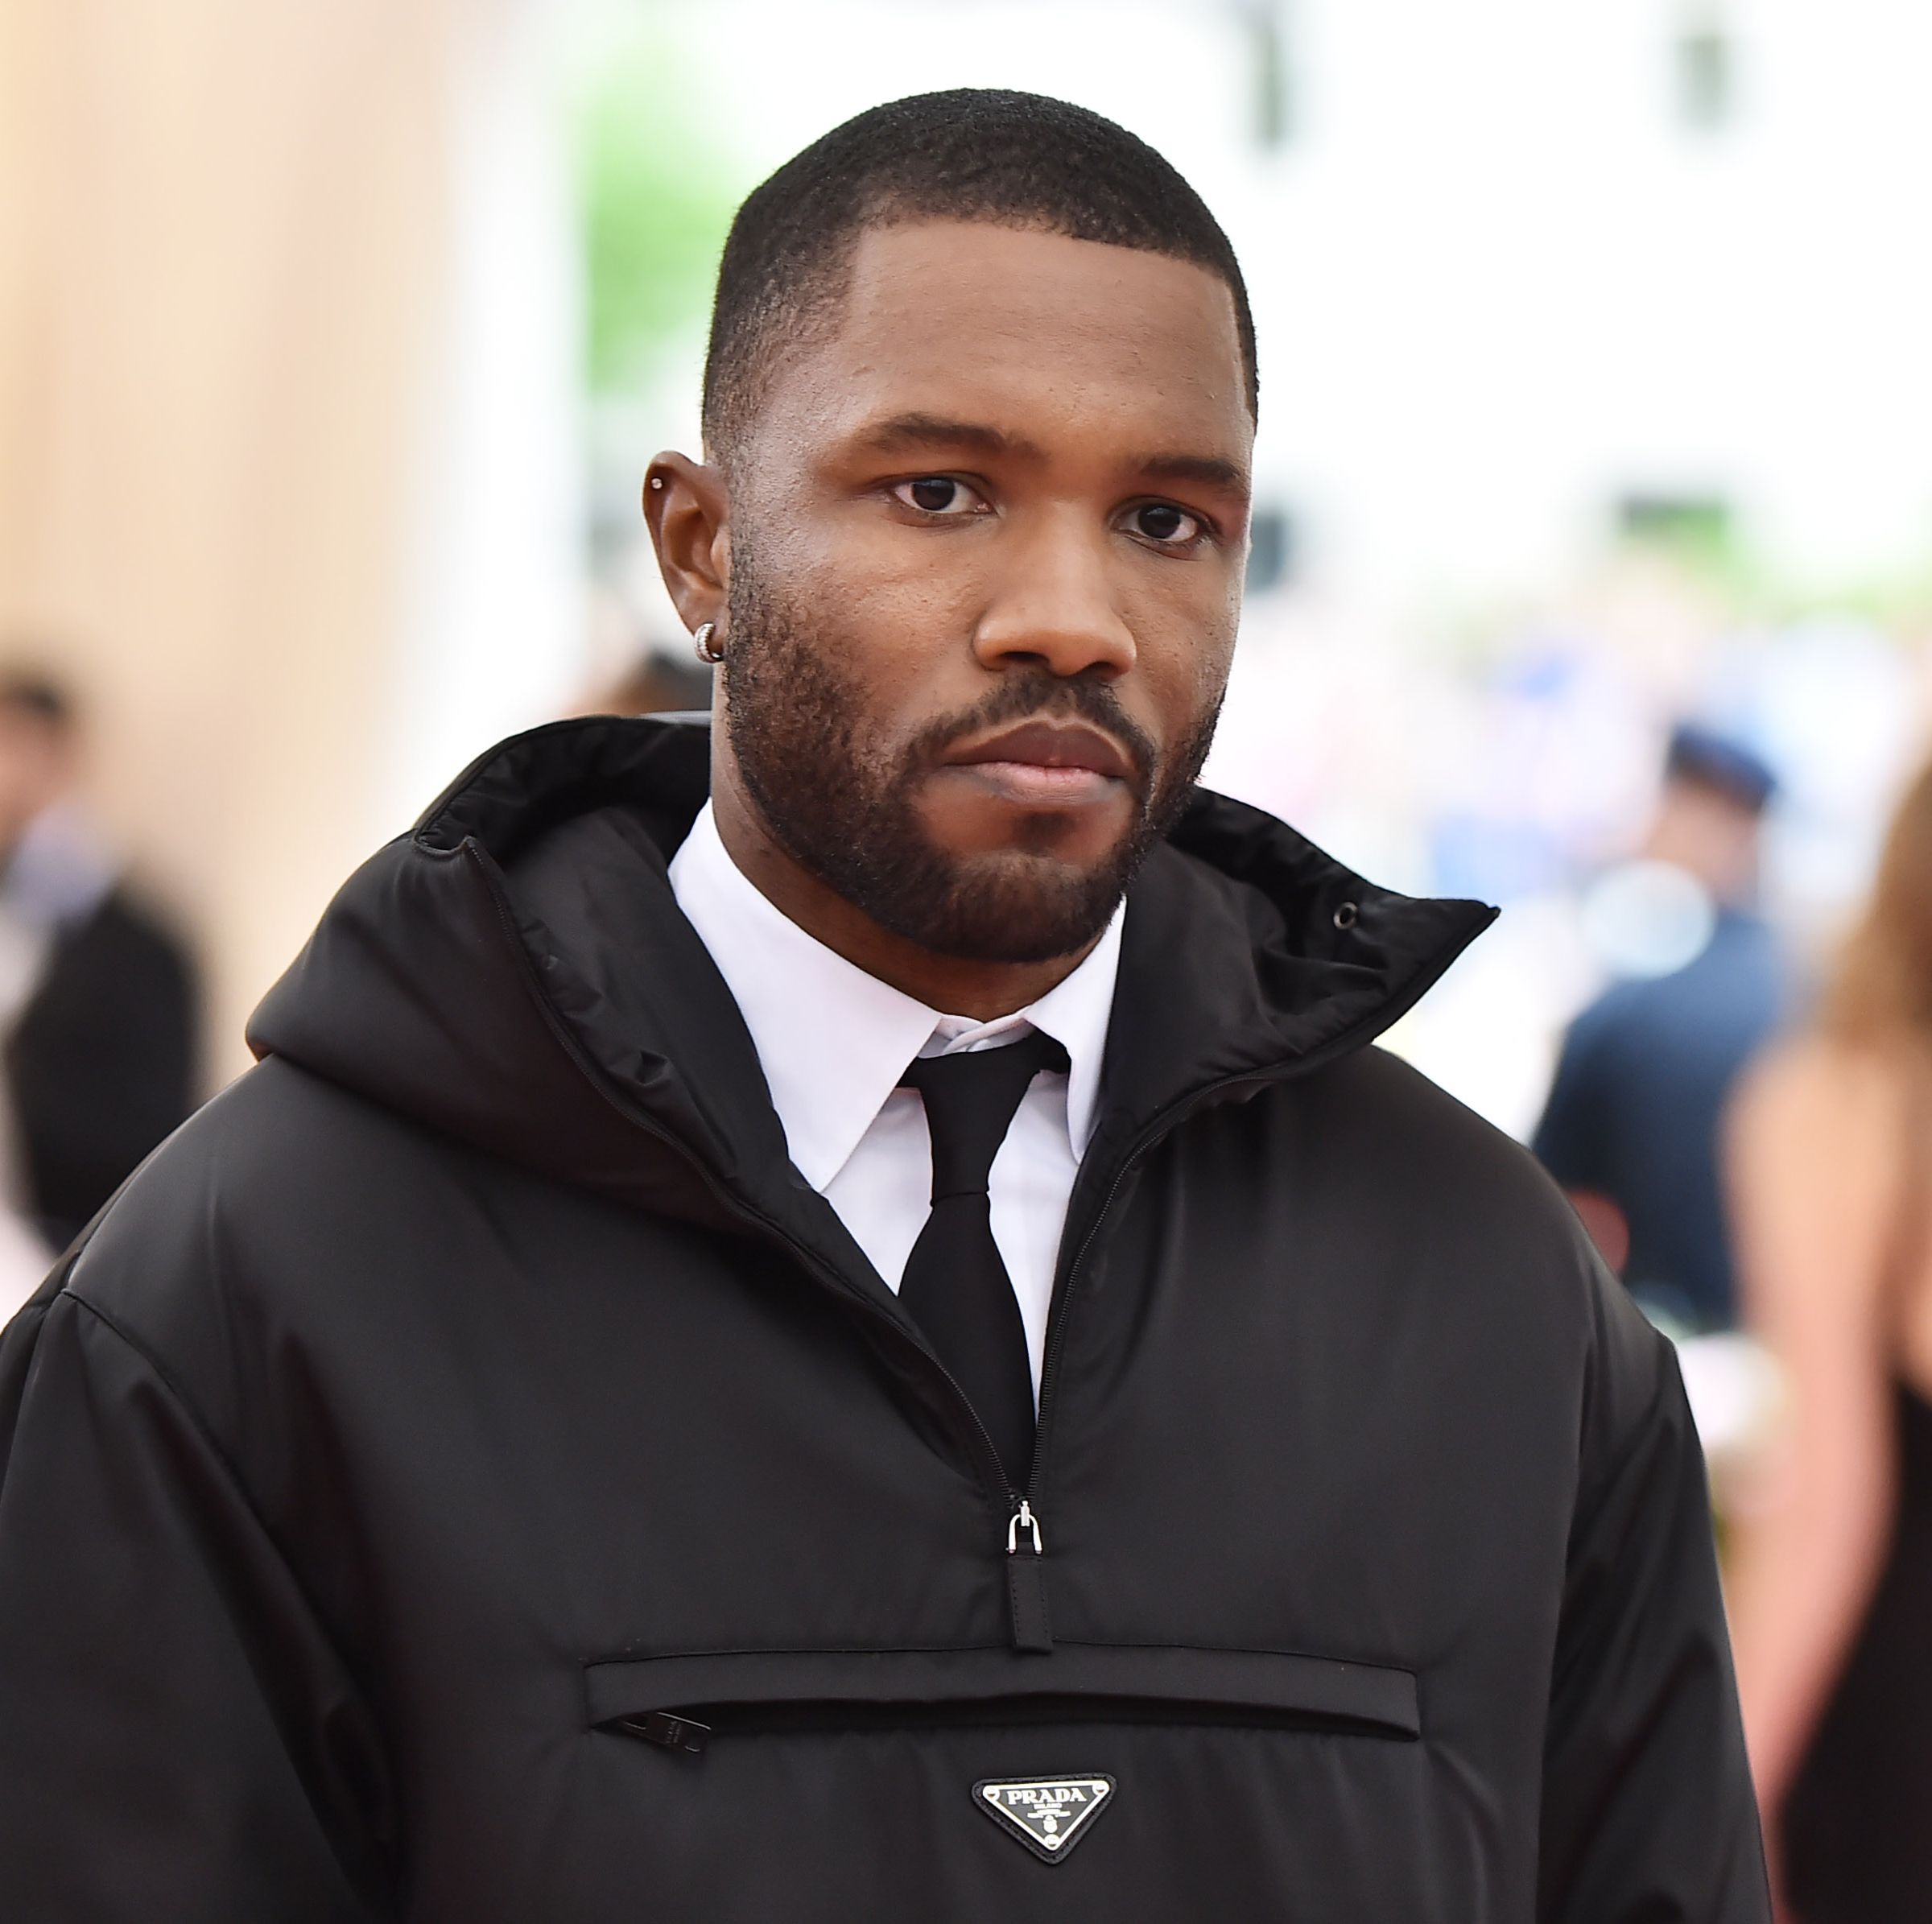 Why Did Frank Ocean Pull Out of Coachella?